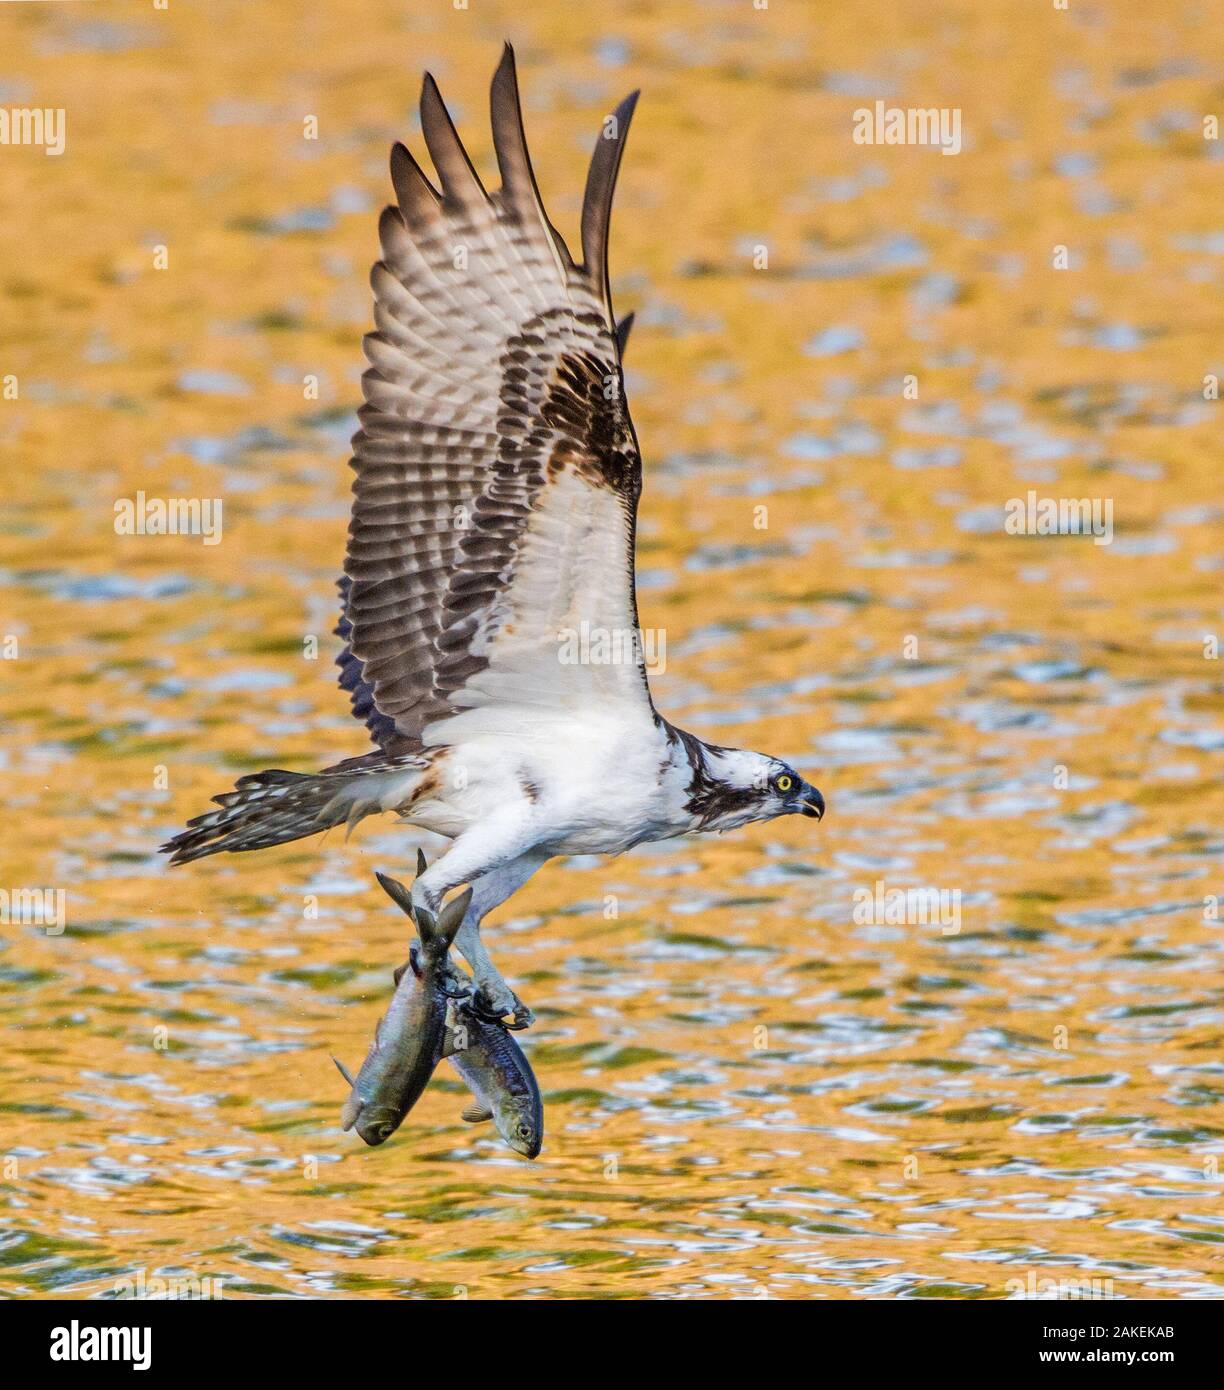 Osprey (Pandion haliaetus) with two Alewife (Alosa pseudoharengus) just caught in the Atlantic Ocean. Acadia National Park, Maine, USA. June. Stock Photo